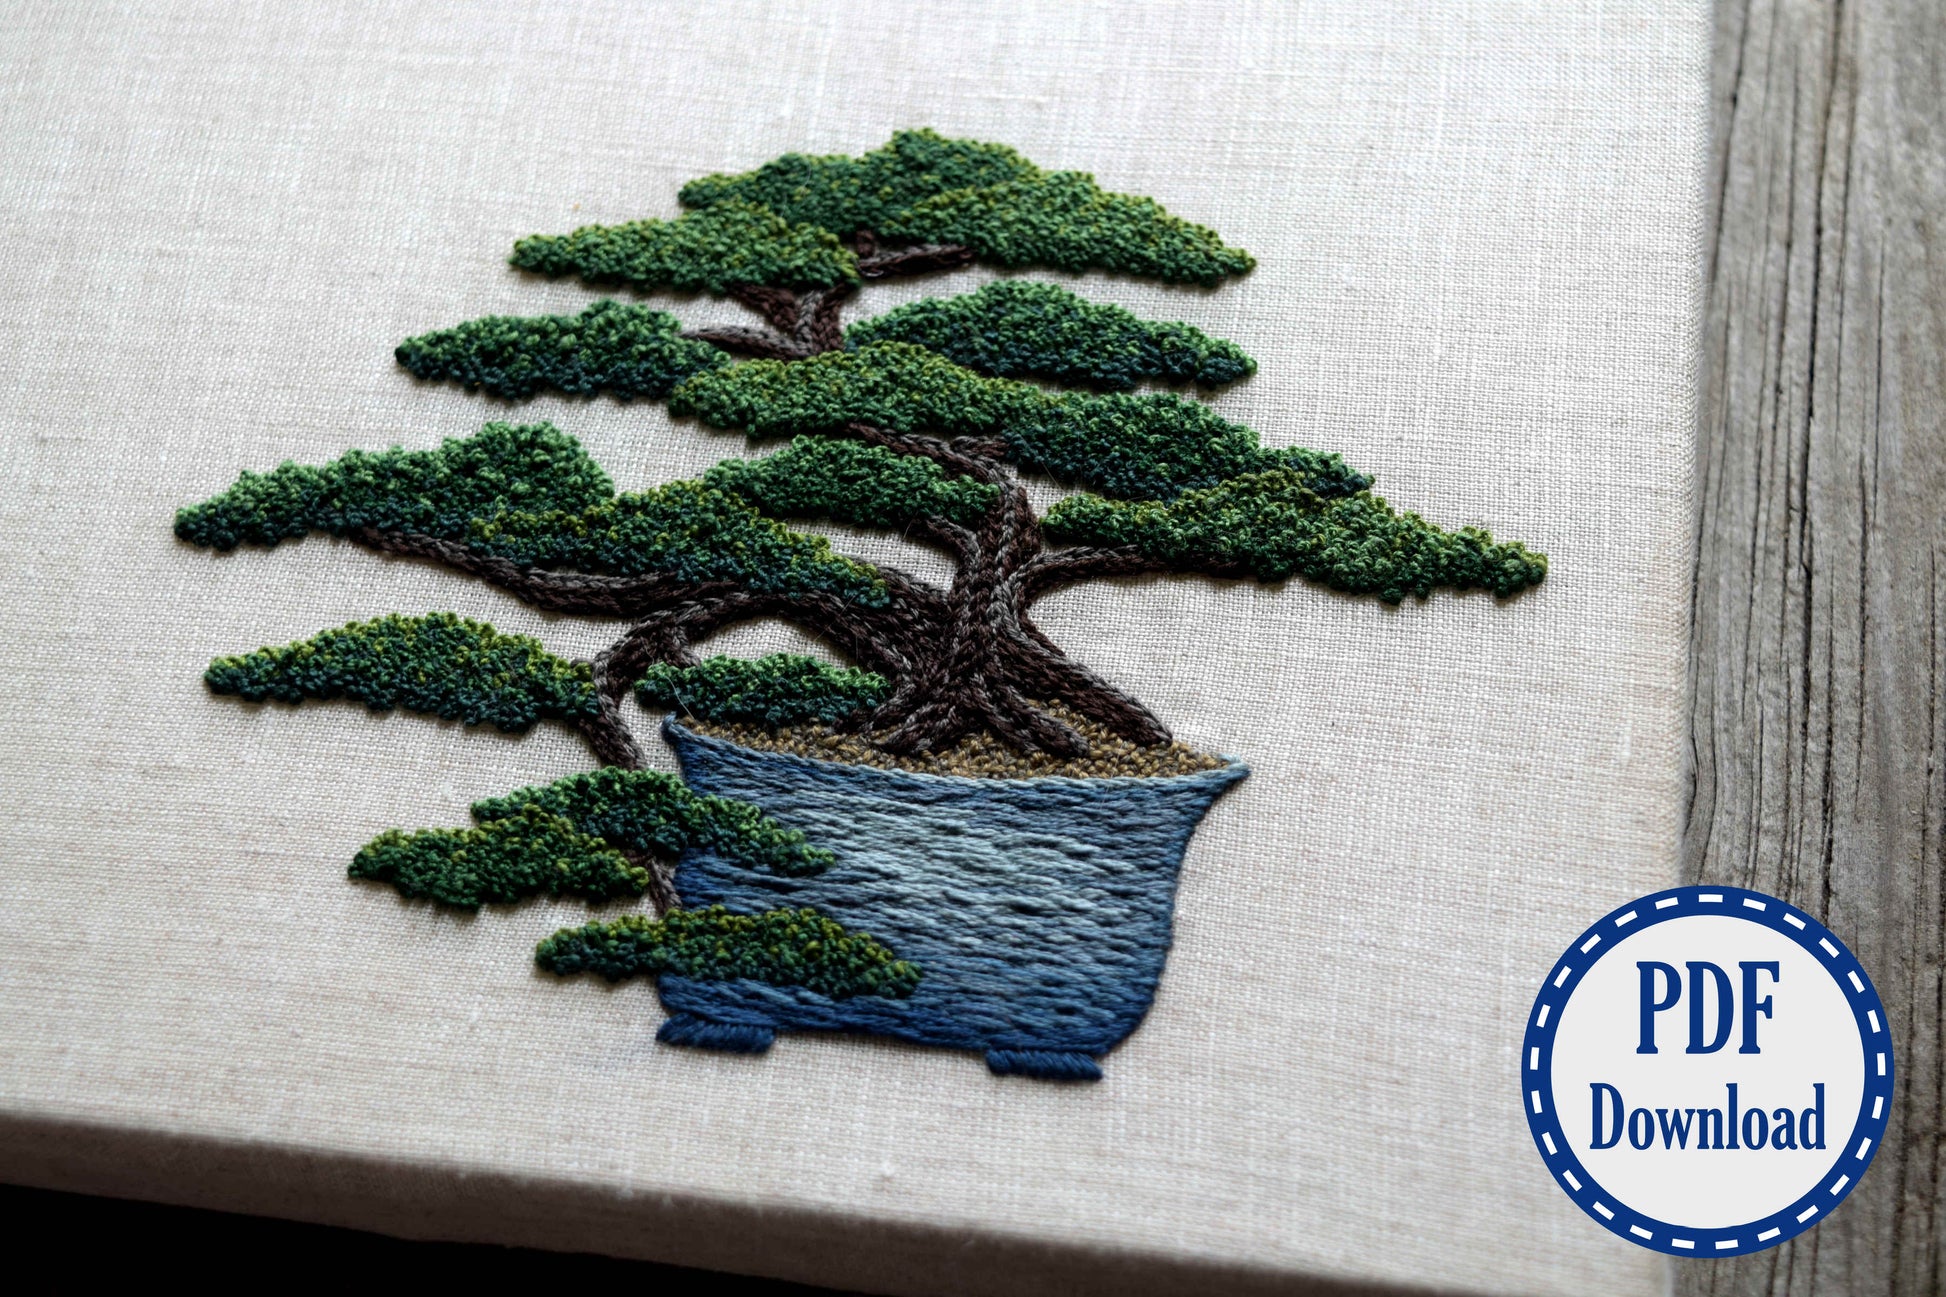 Closeup of hand embroidered juniper bonsai tree with french knot foliage and needlepainted pot. PDF download badge in corner.